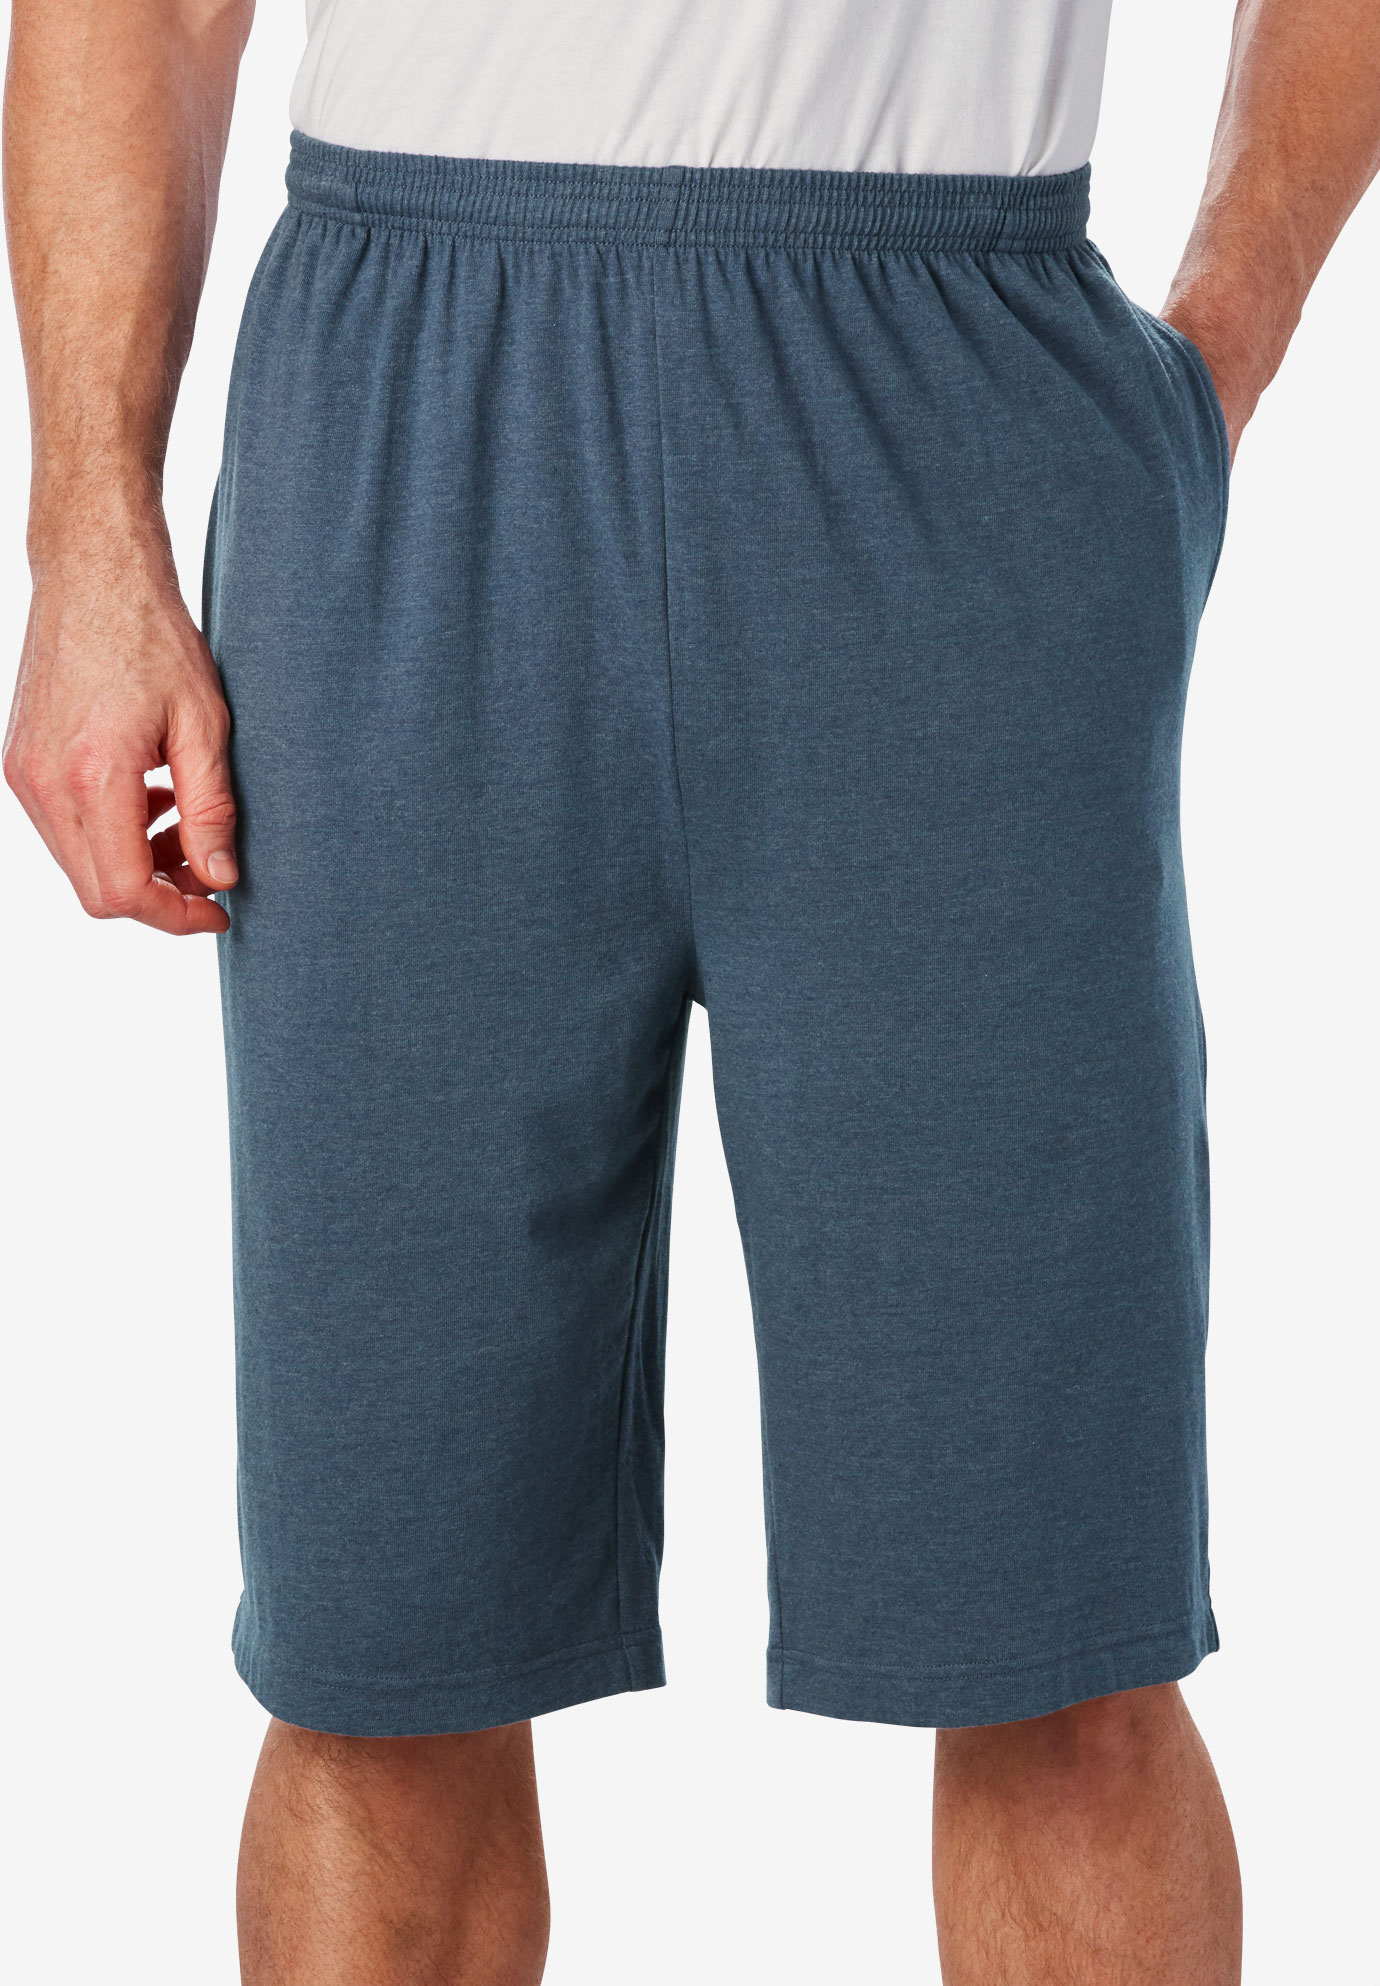 Lightweight Extra Long Shorts| Big and Tall Active Shorts | King Size